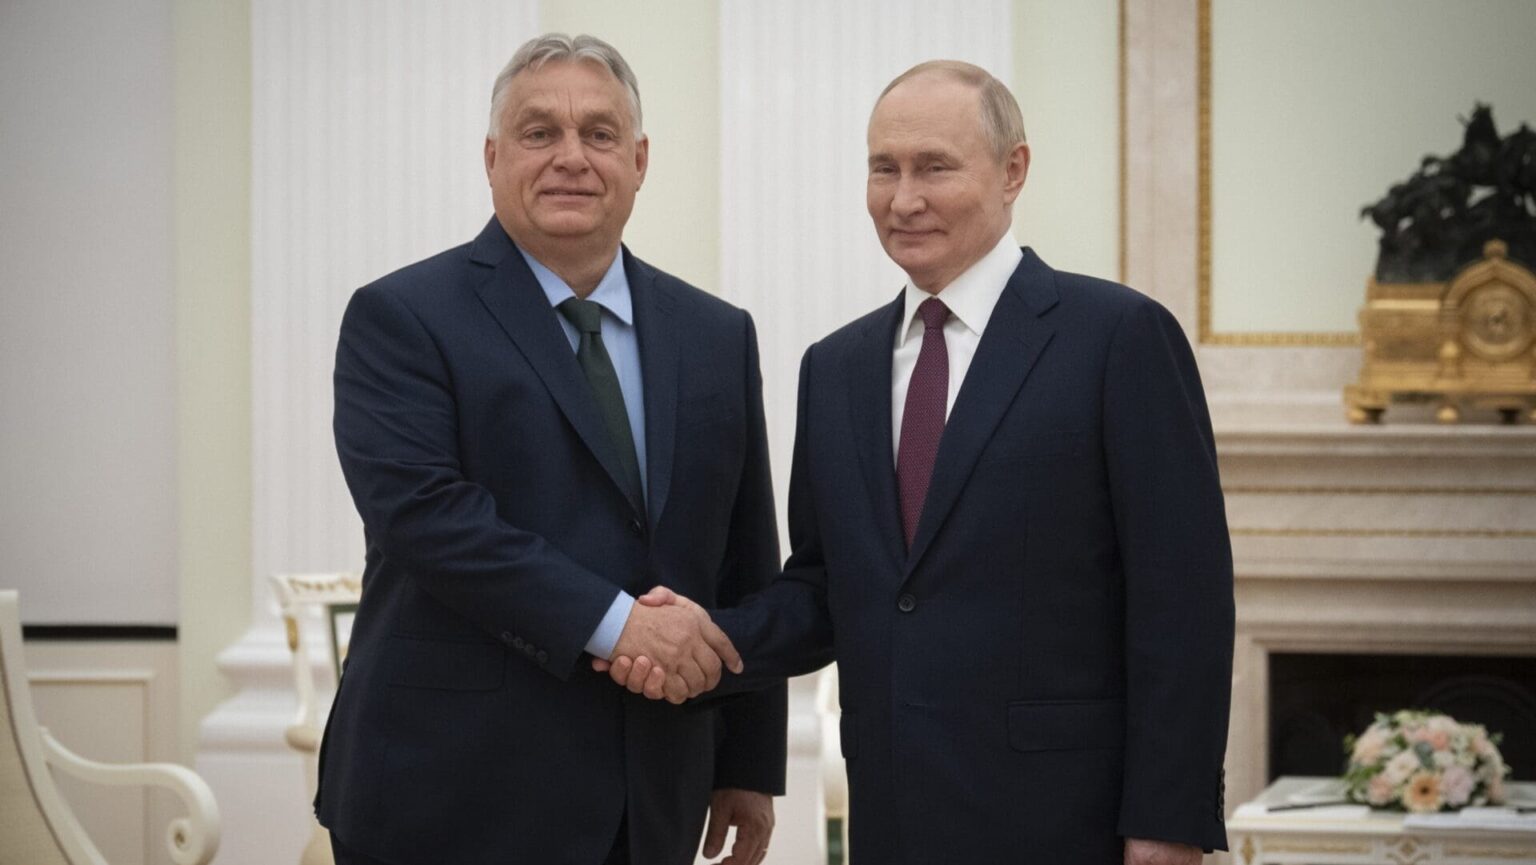 PM Orbán and Putin Meet to Discuss Peace, Bilateral Relations